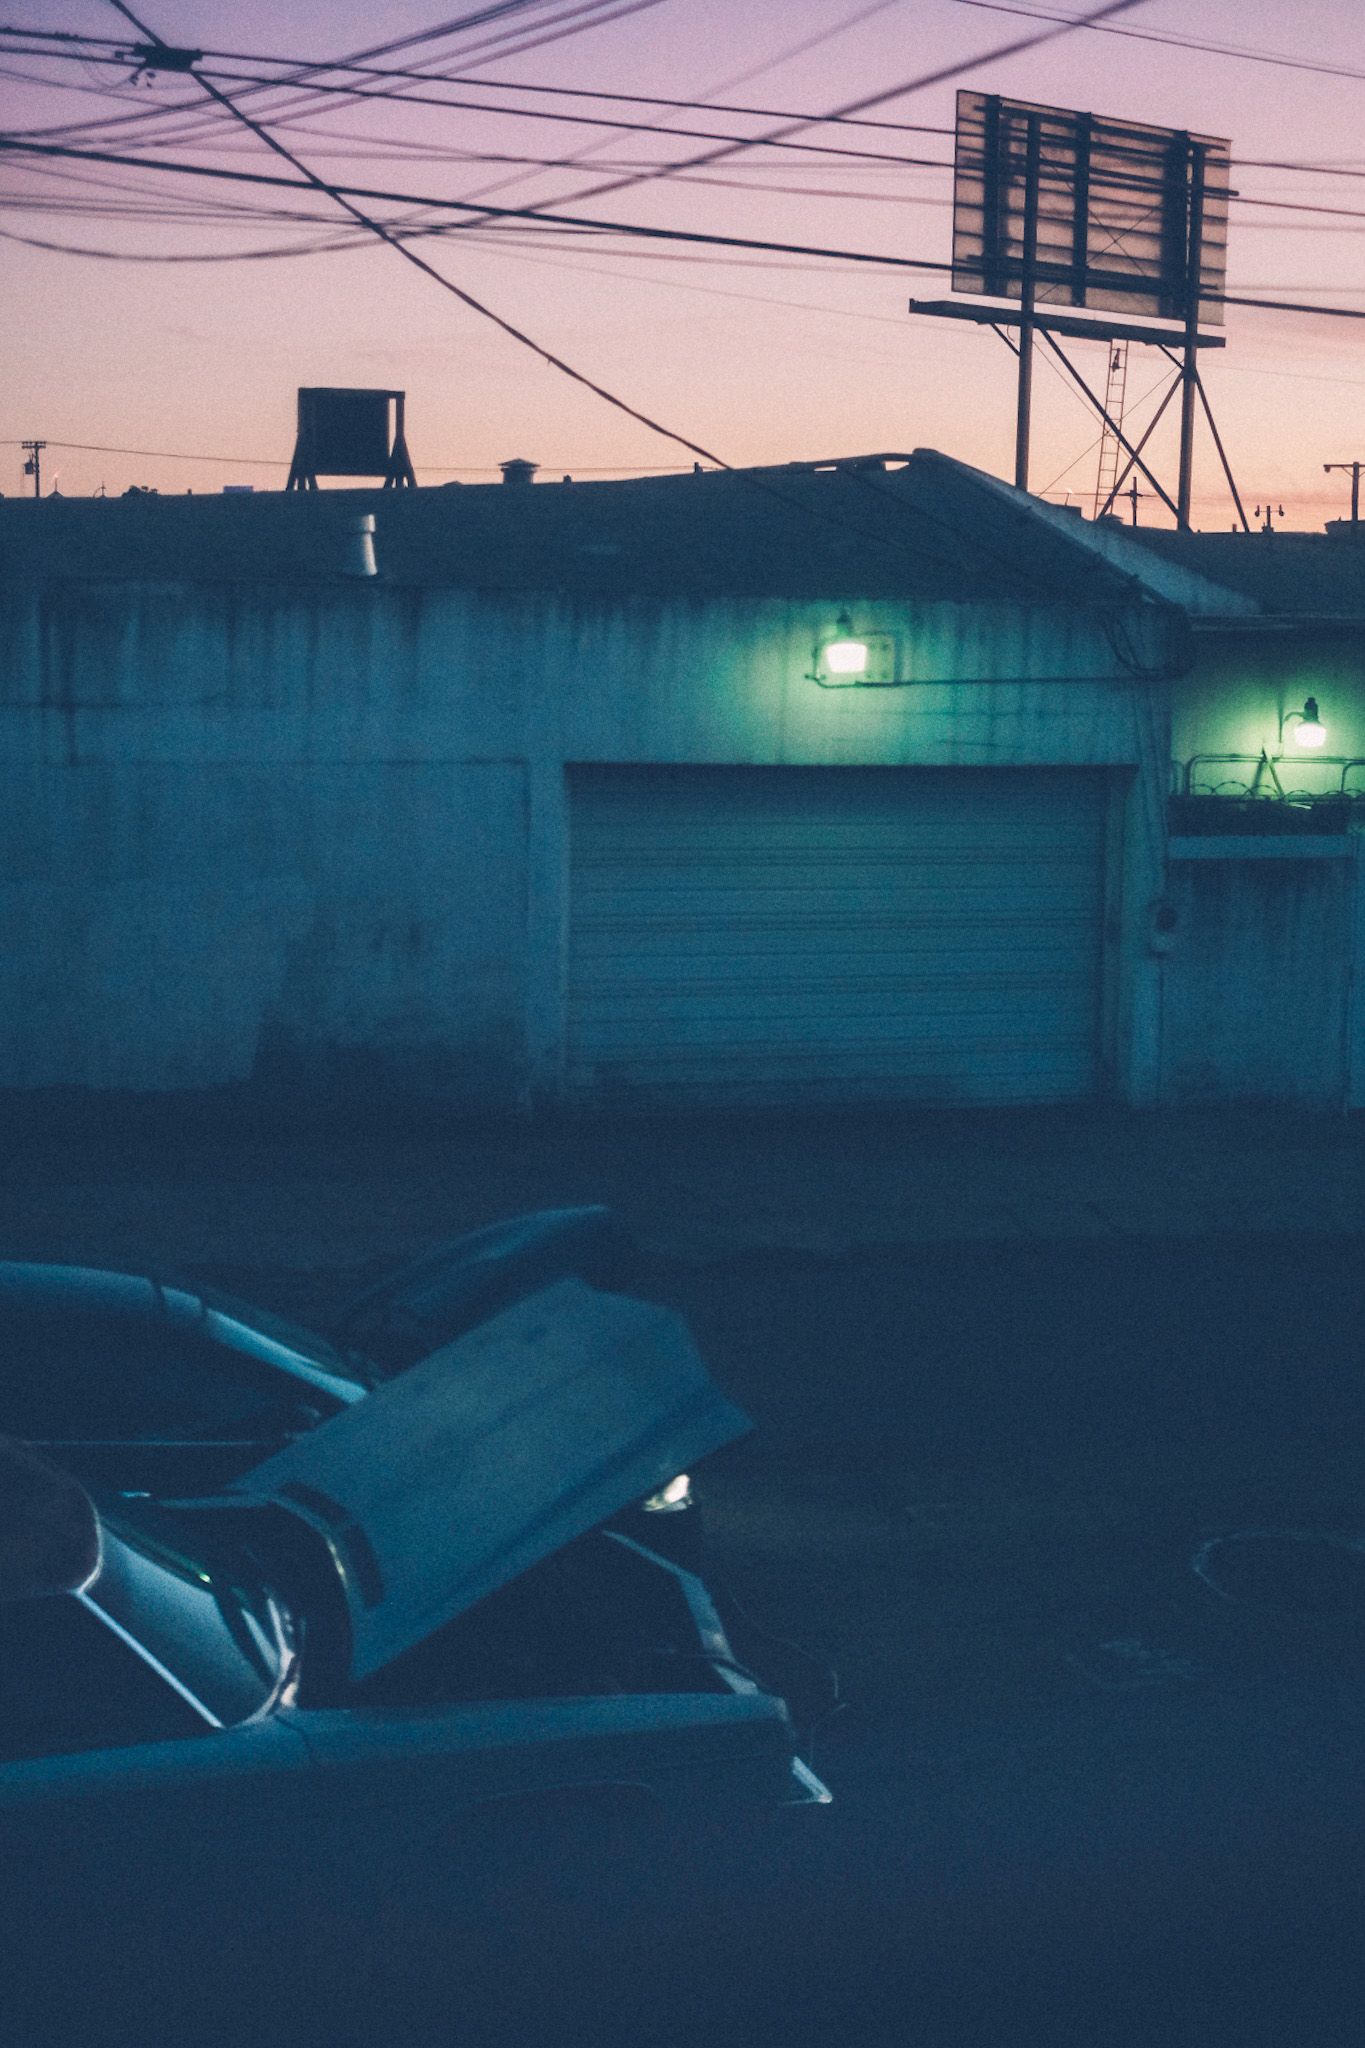 The hood of an old car is propped up as it gets jumped by another car, a green light of a garage across the street glowing against the pink sunset in the background. A billboard rises in the near distance, but you can only see its backside.